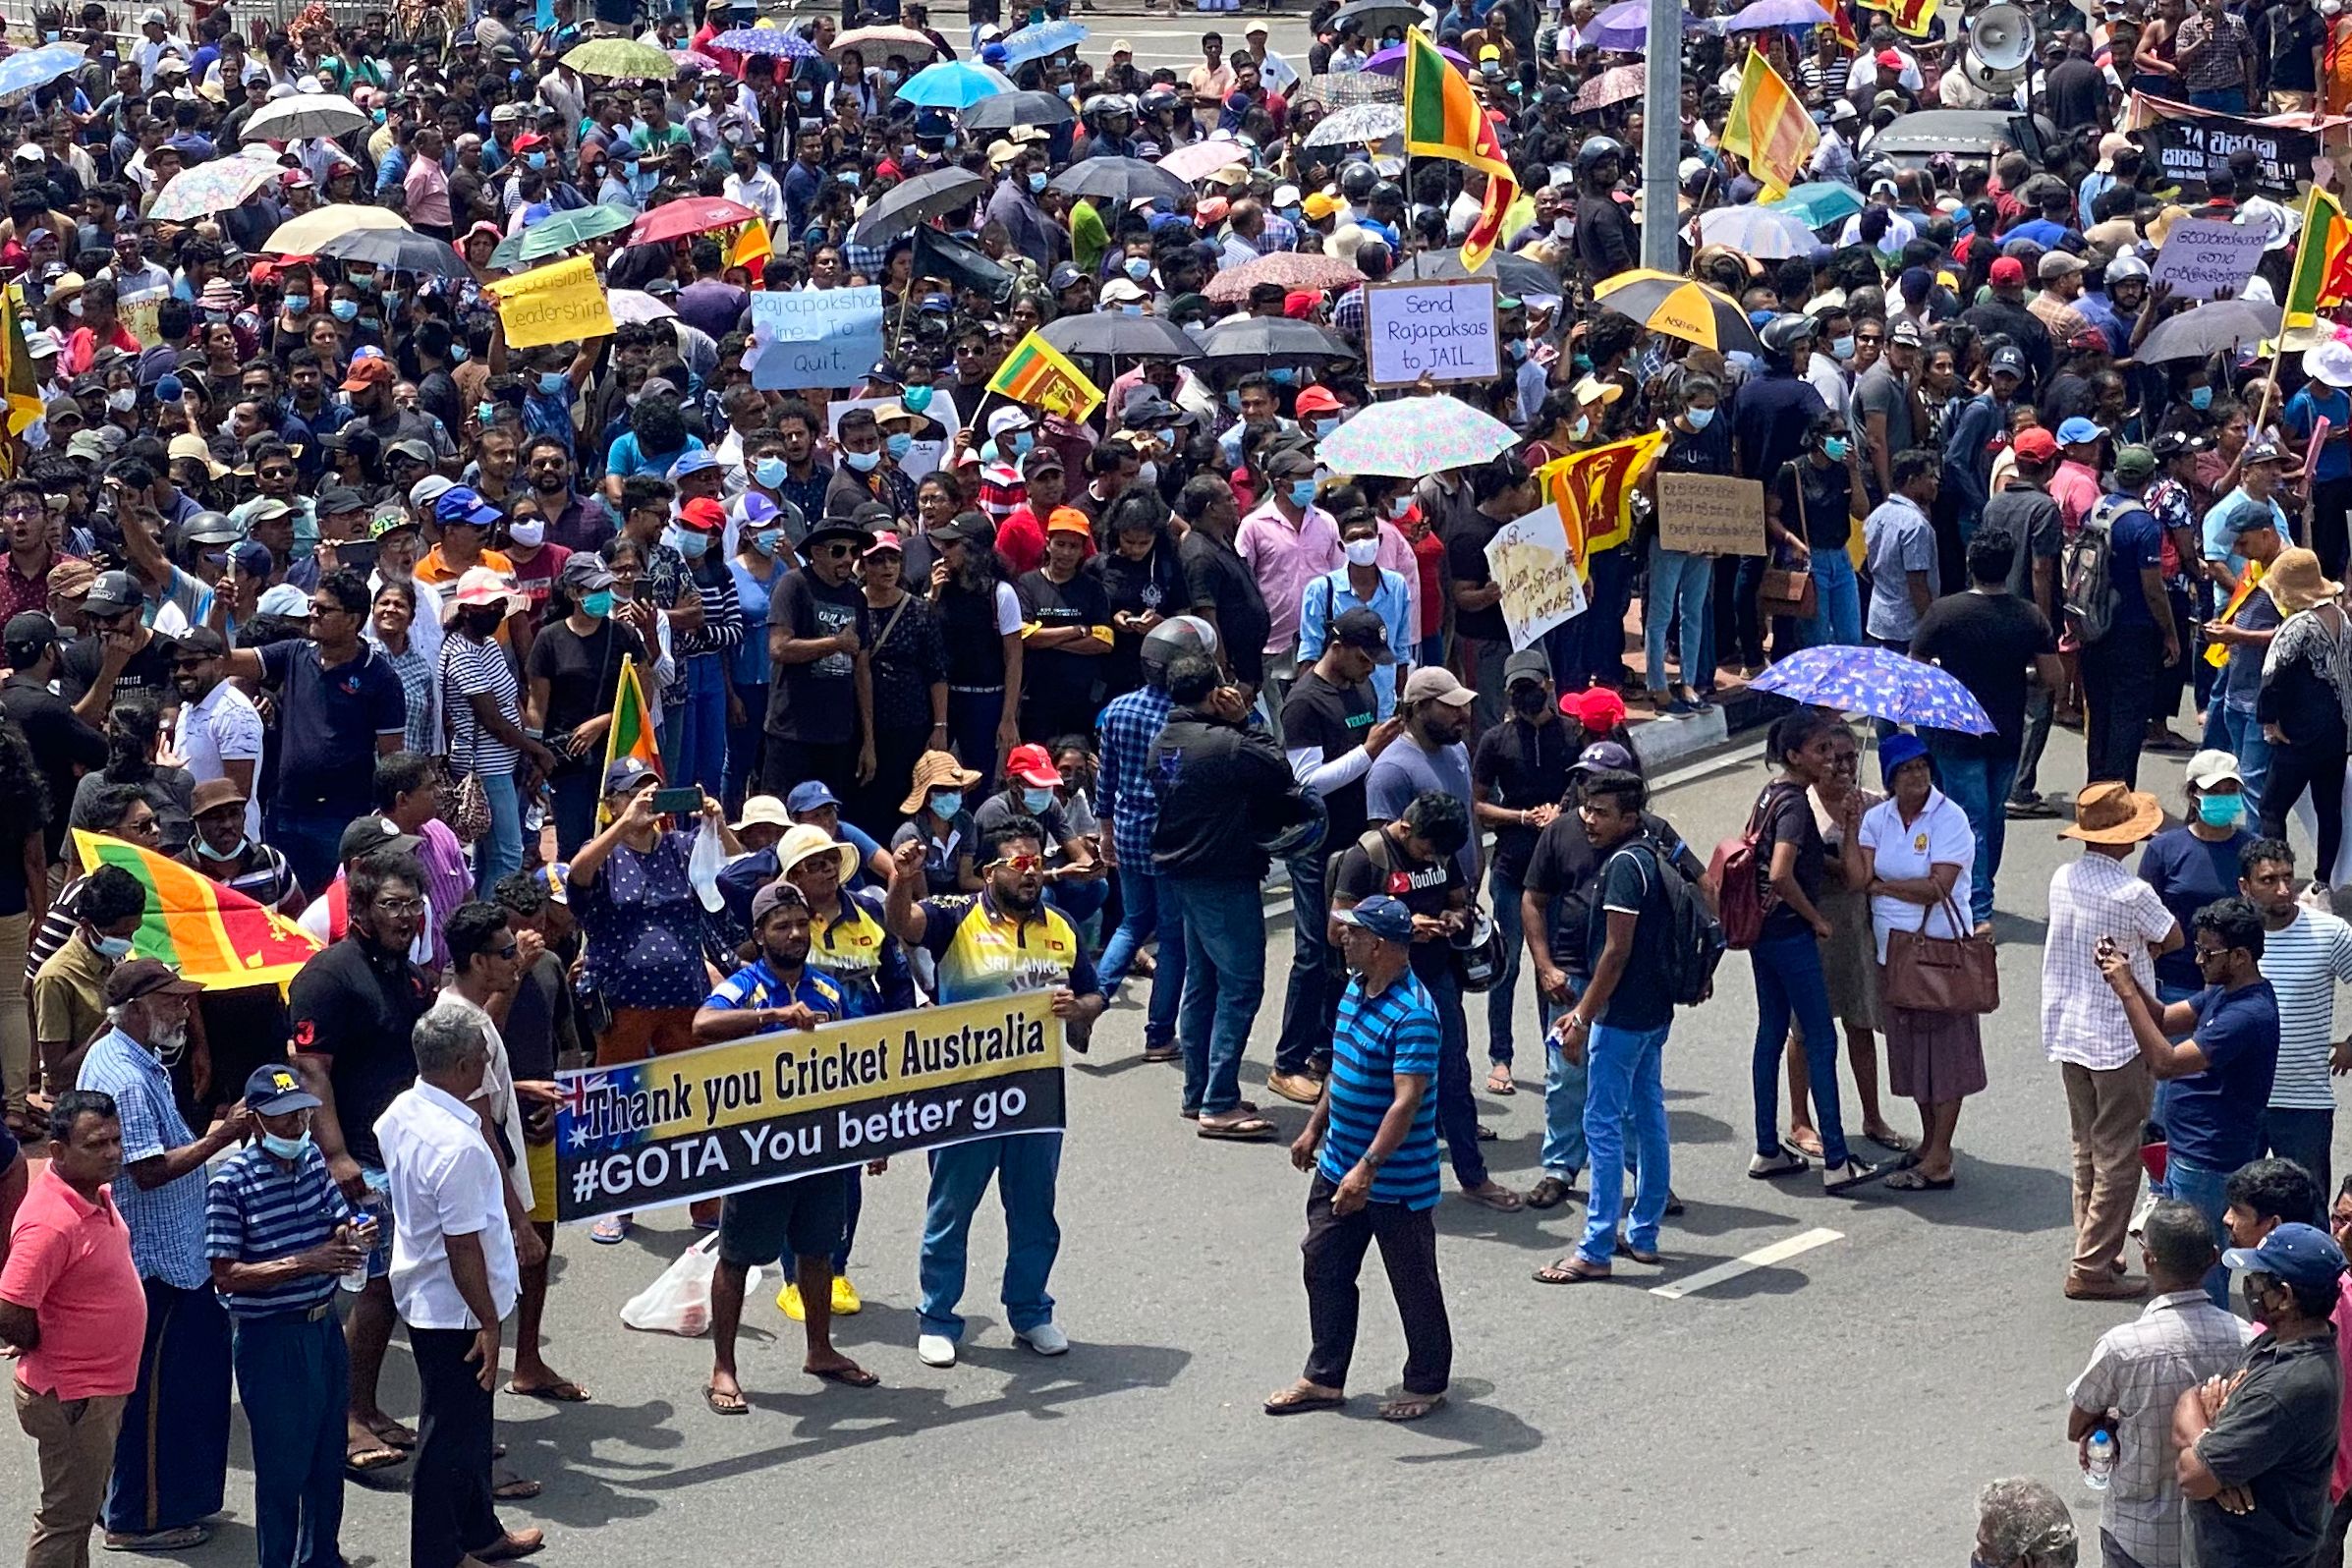 Protesters participate in an anti-government demonstration outside the Galle International Cricket Stadium in Galle on July 9, 2022. (Photo by ISHARA S. KODIKARA / AFP) (Photo by ISHARA S. KODIKARA/AFP via Getty Images)